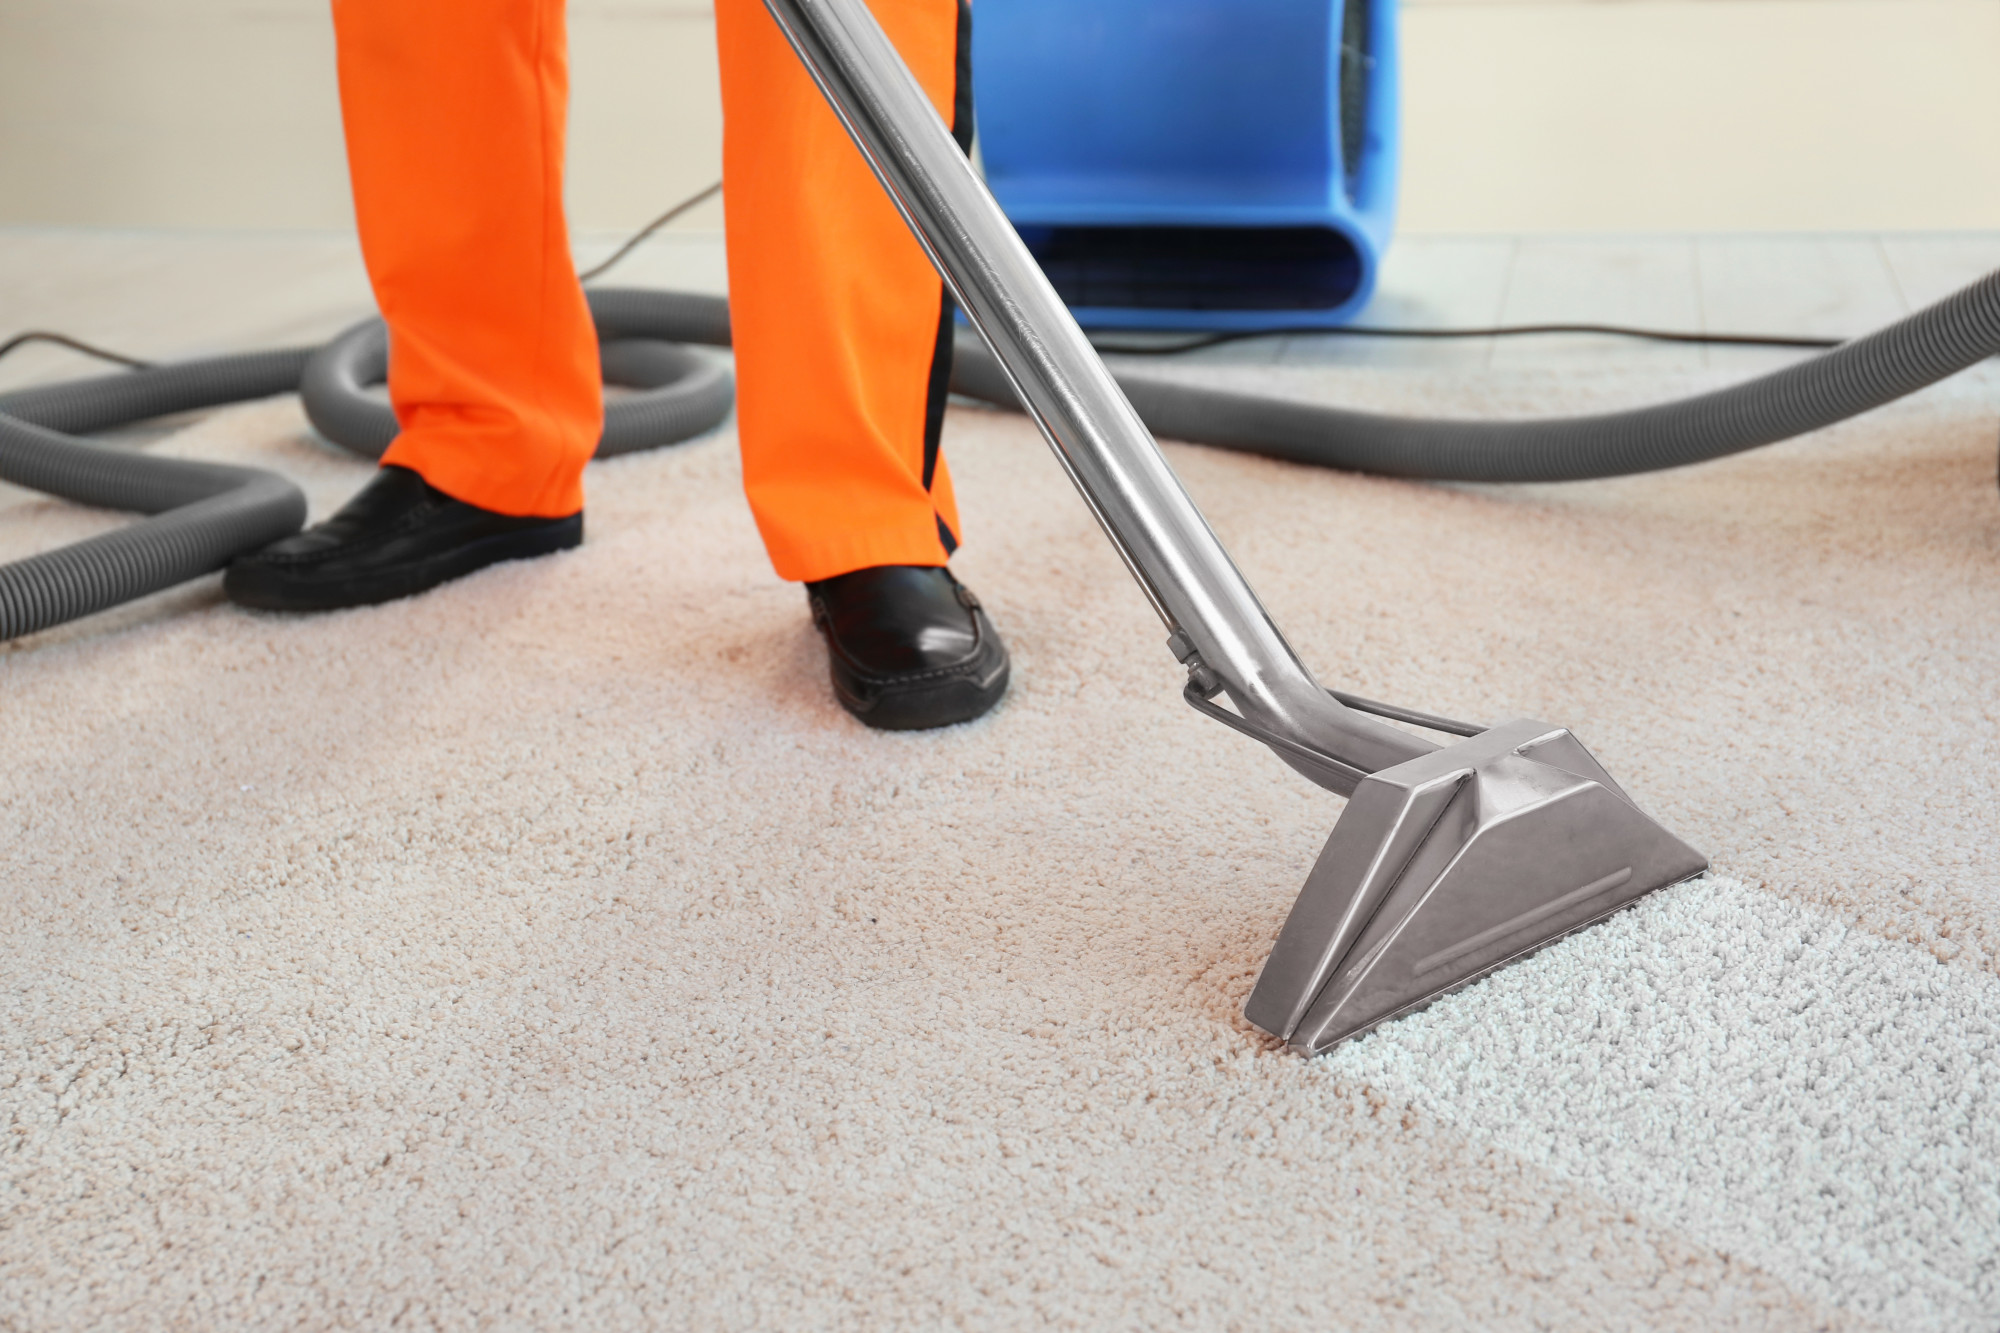 Dirty Carpet Alert: Signs That Your Carpets Need Cleaning